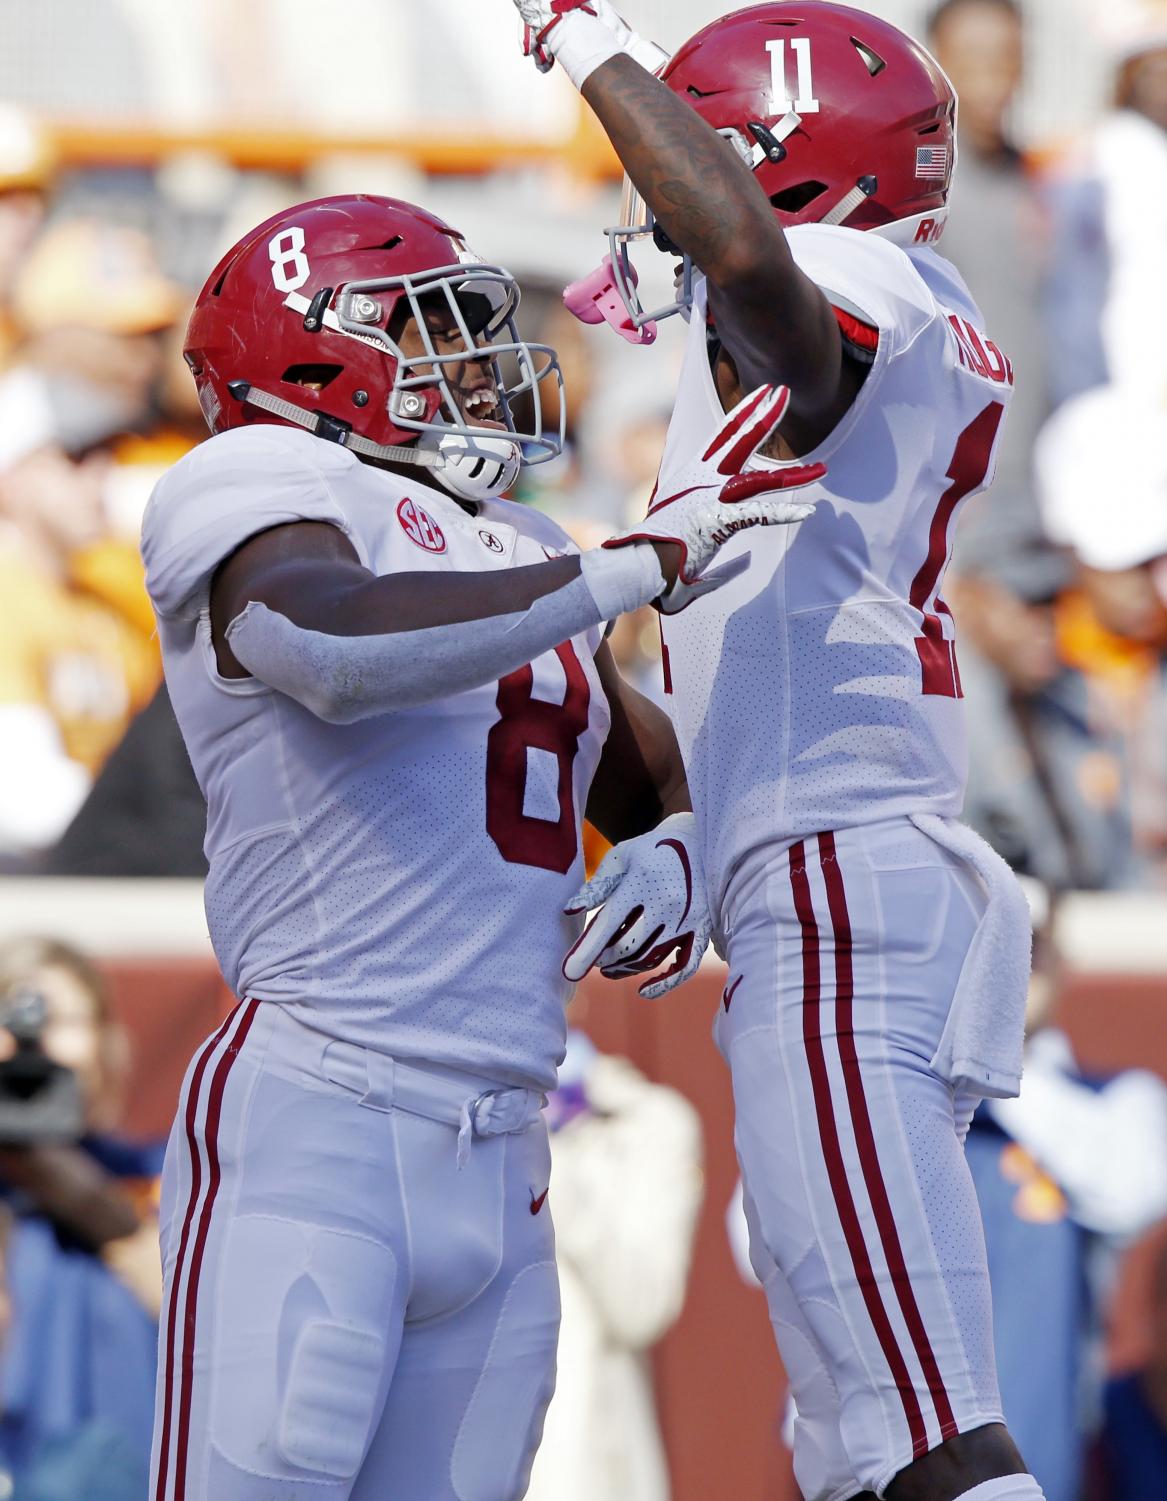 Fast+start+helps+No.+1+Alabama+trounce+Tennessee+58-21